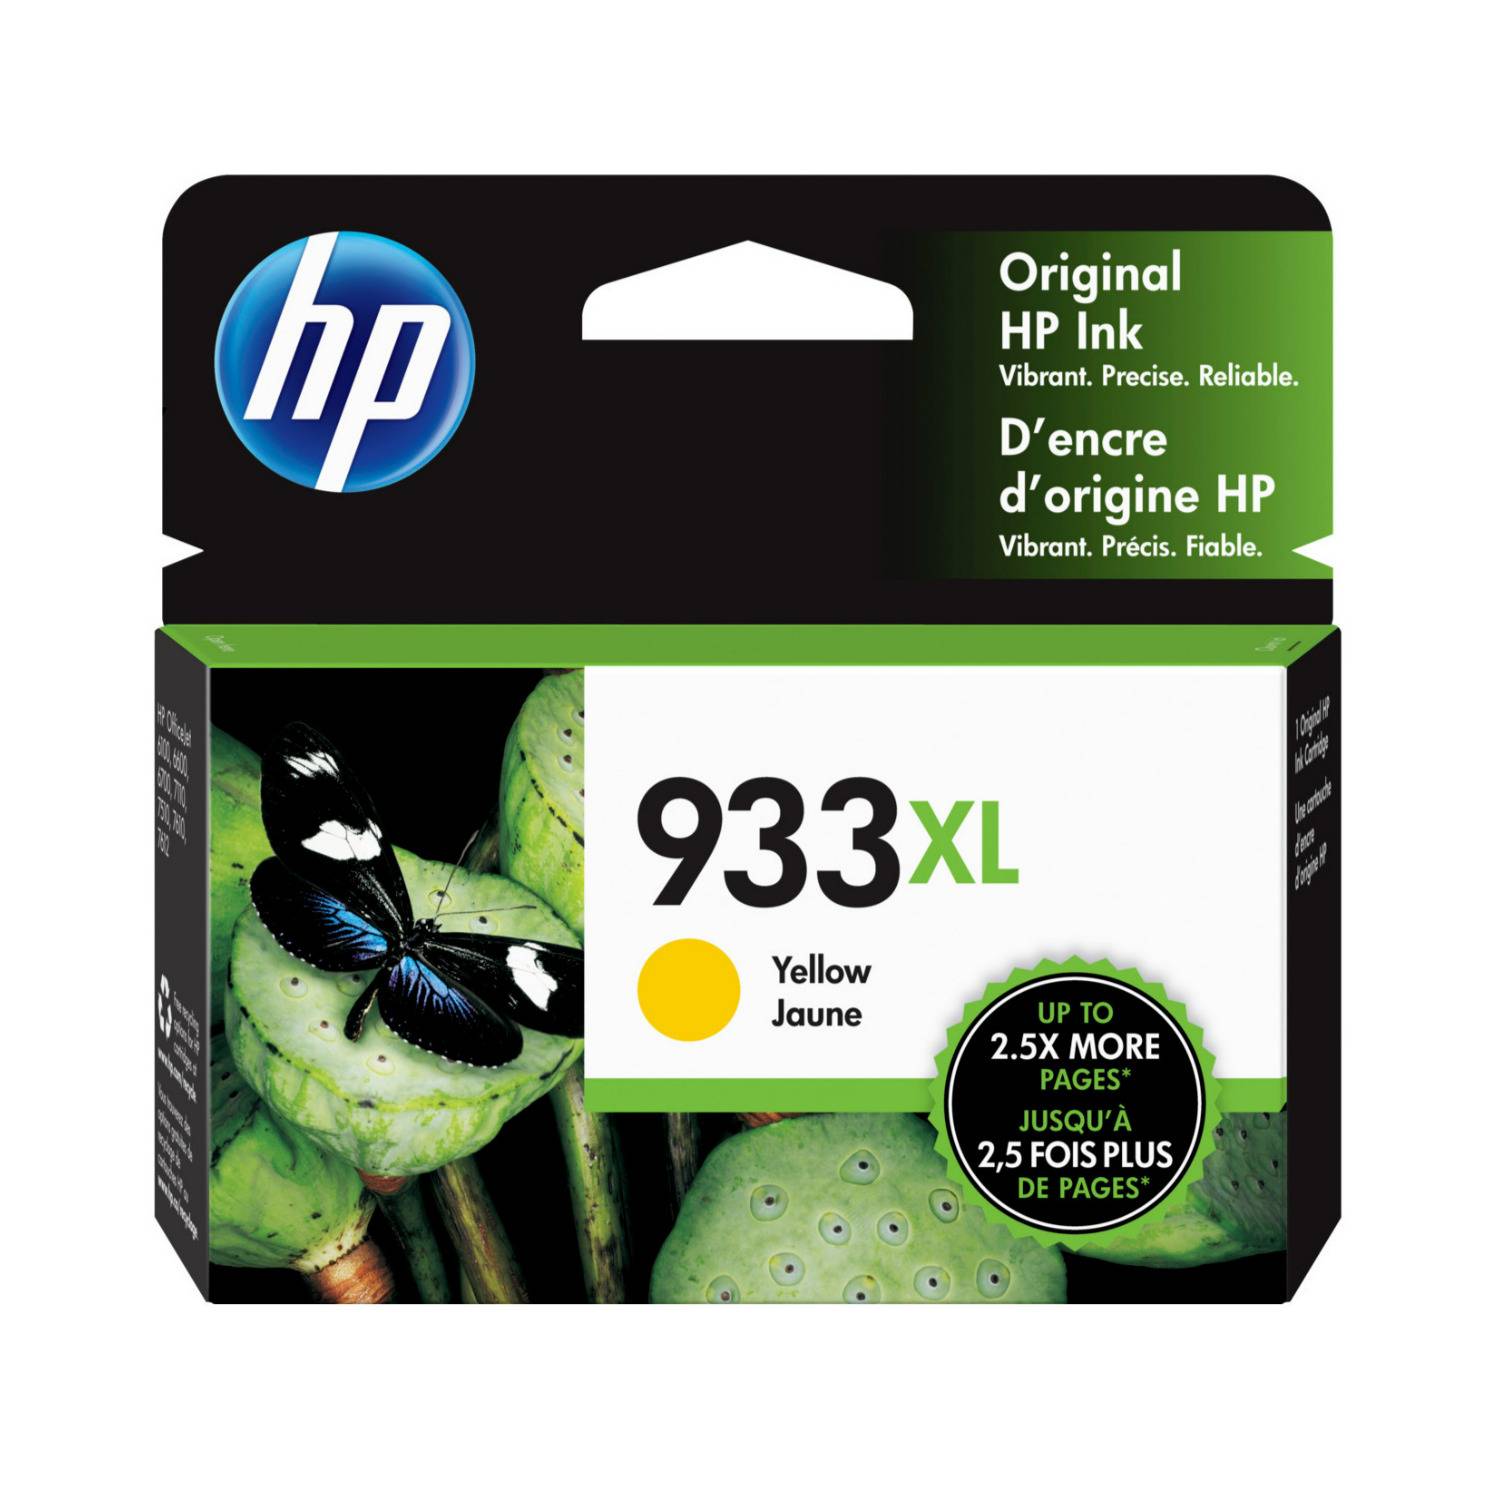 HP 933XL HP Printers Compatible High Yield Original Ink Cartridge (Yellow, 825 Pages)